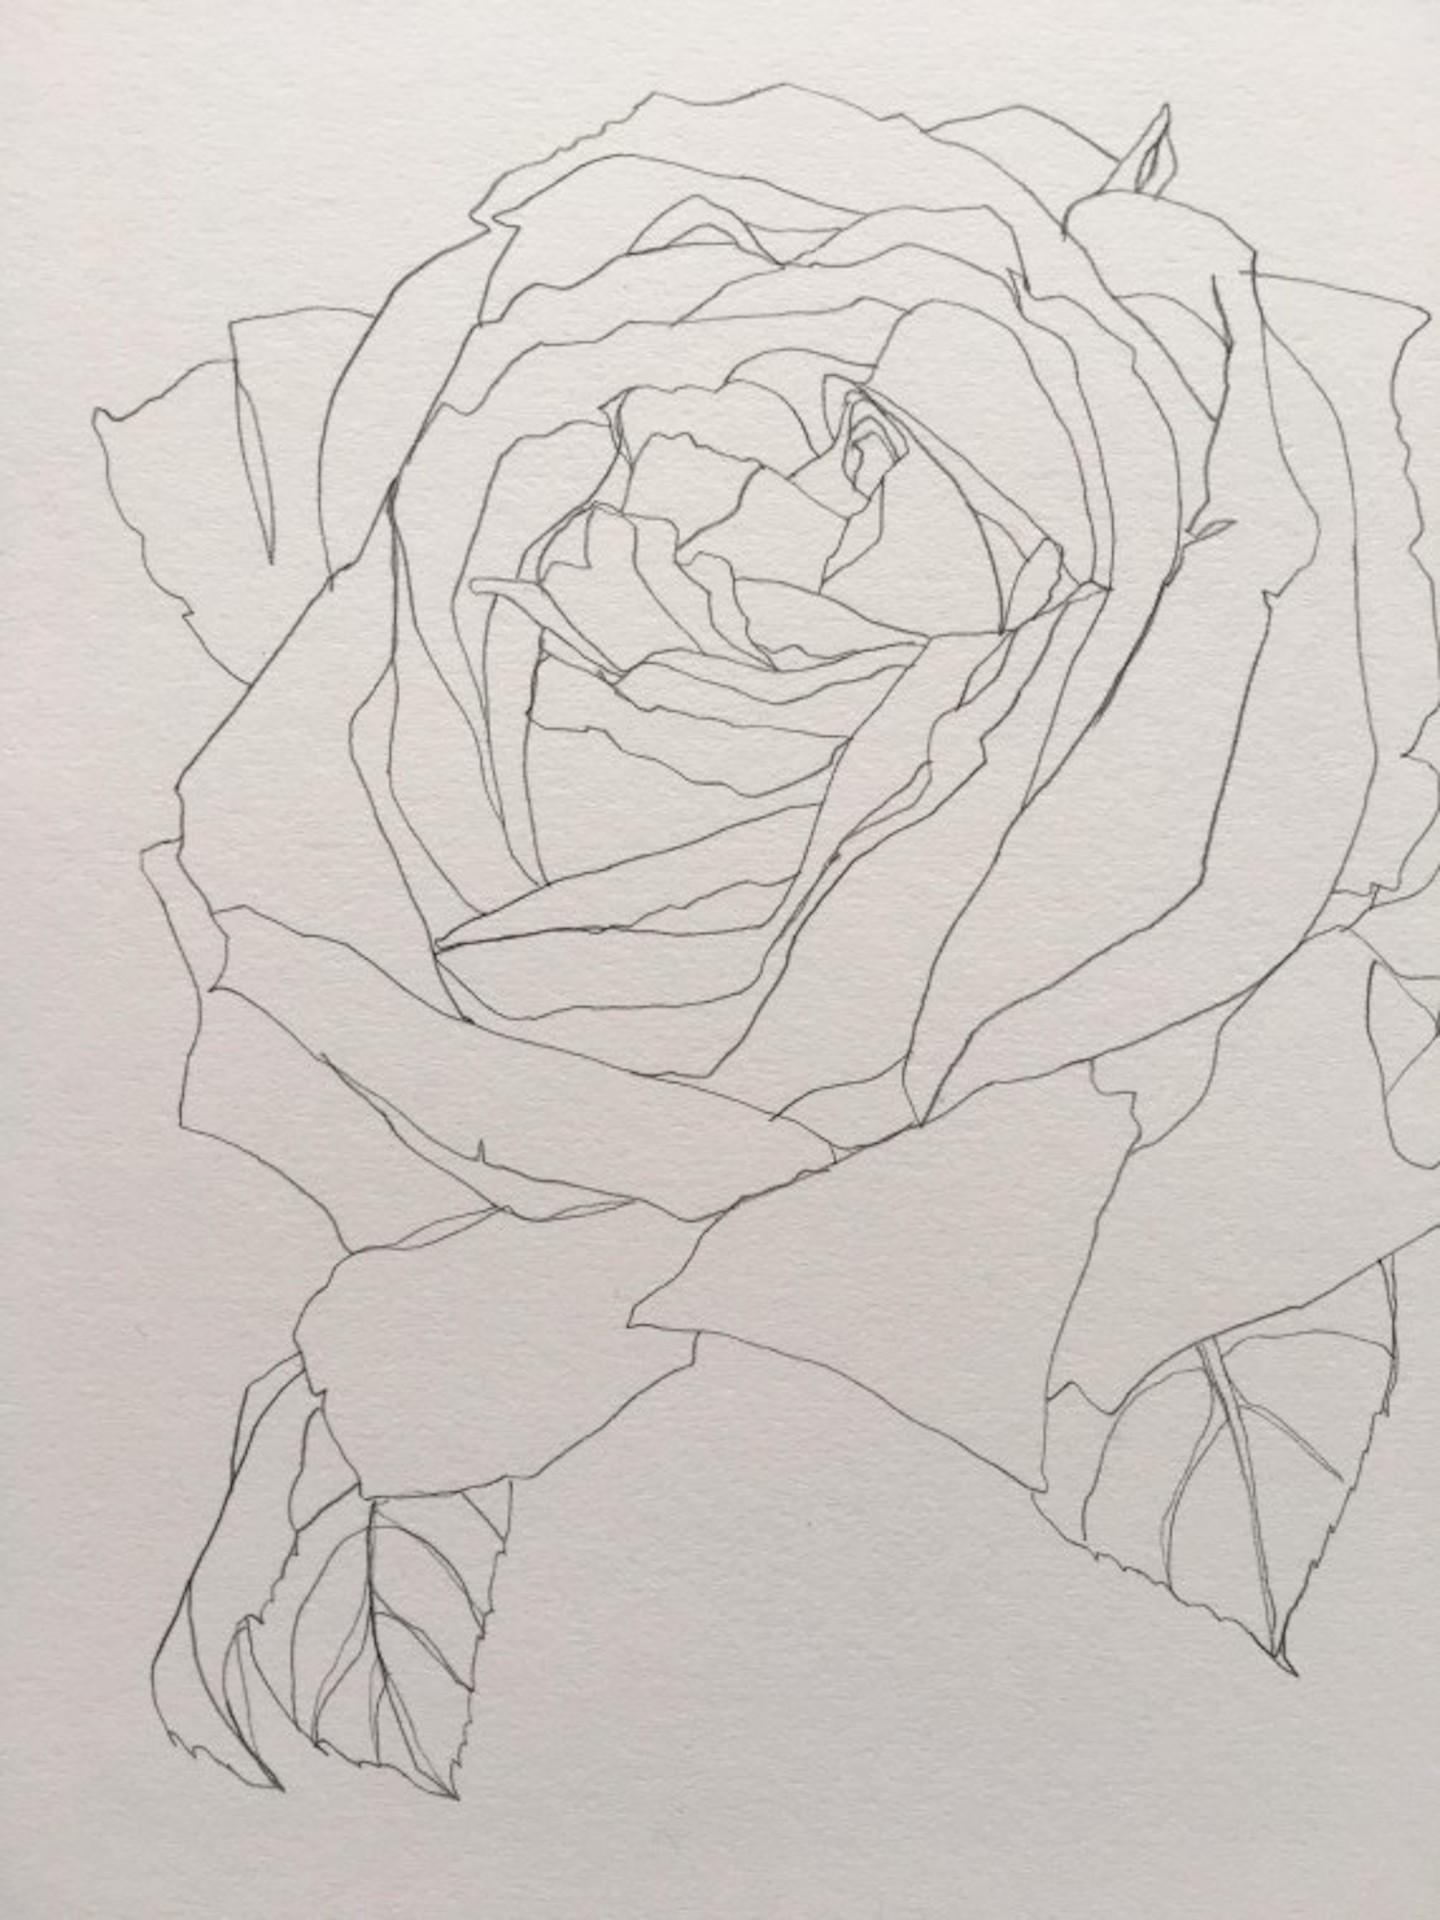 Rose 19 [2021]
original

Pencil on 150gsm paper

Image size: H:30 cm x W:20 cm

Complete Size of Unframed Work: H:30 cm x W:20 cm x D:0.01cm

Sold Unframed

Please note that insitu images are purely an indication of how a piece may look

This